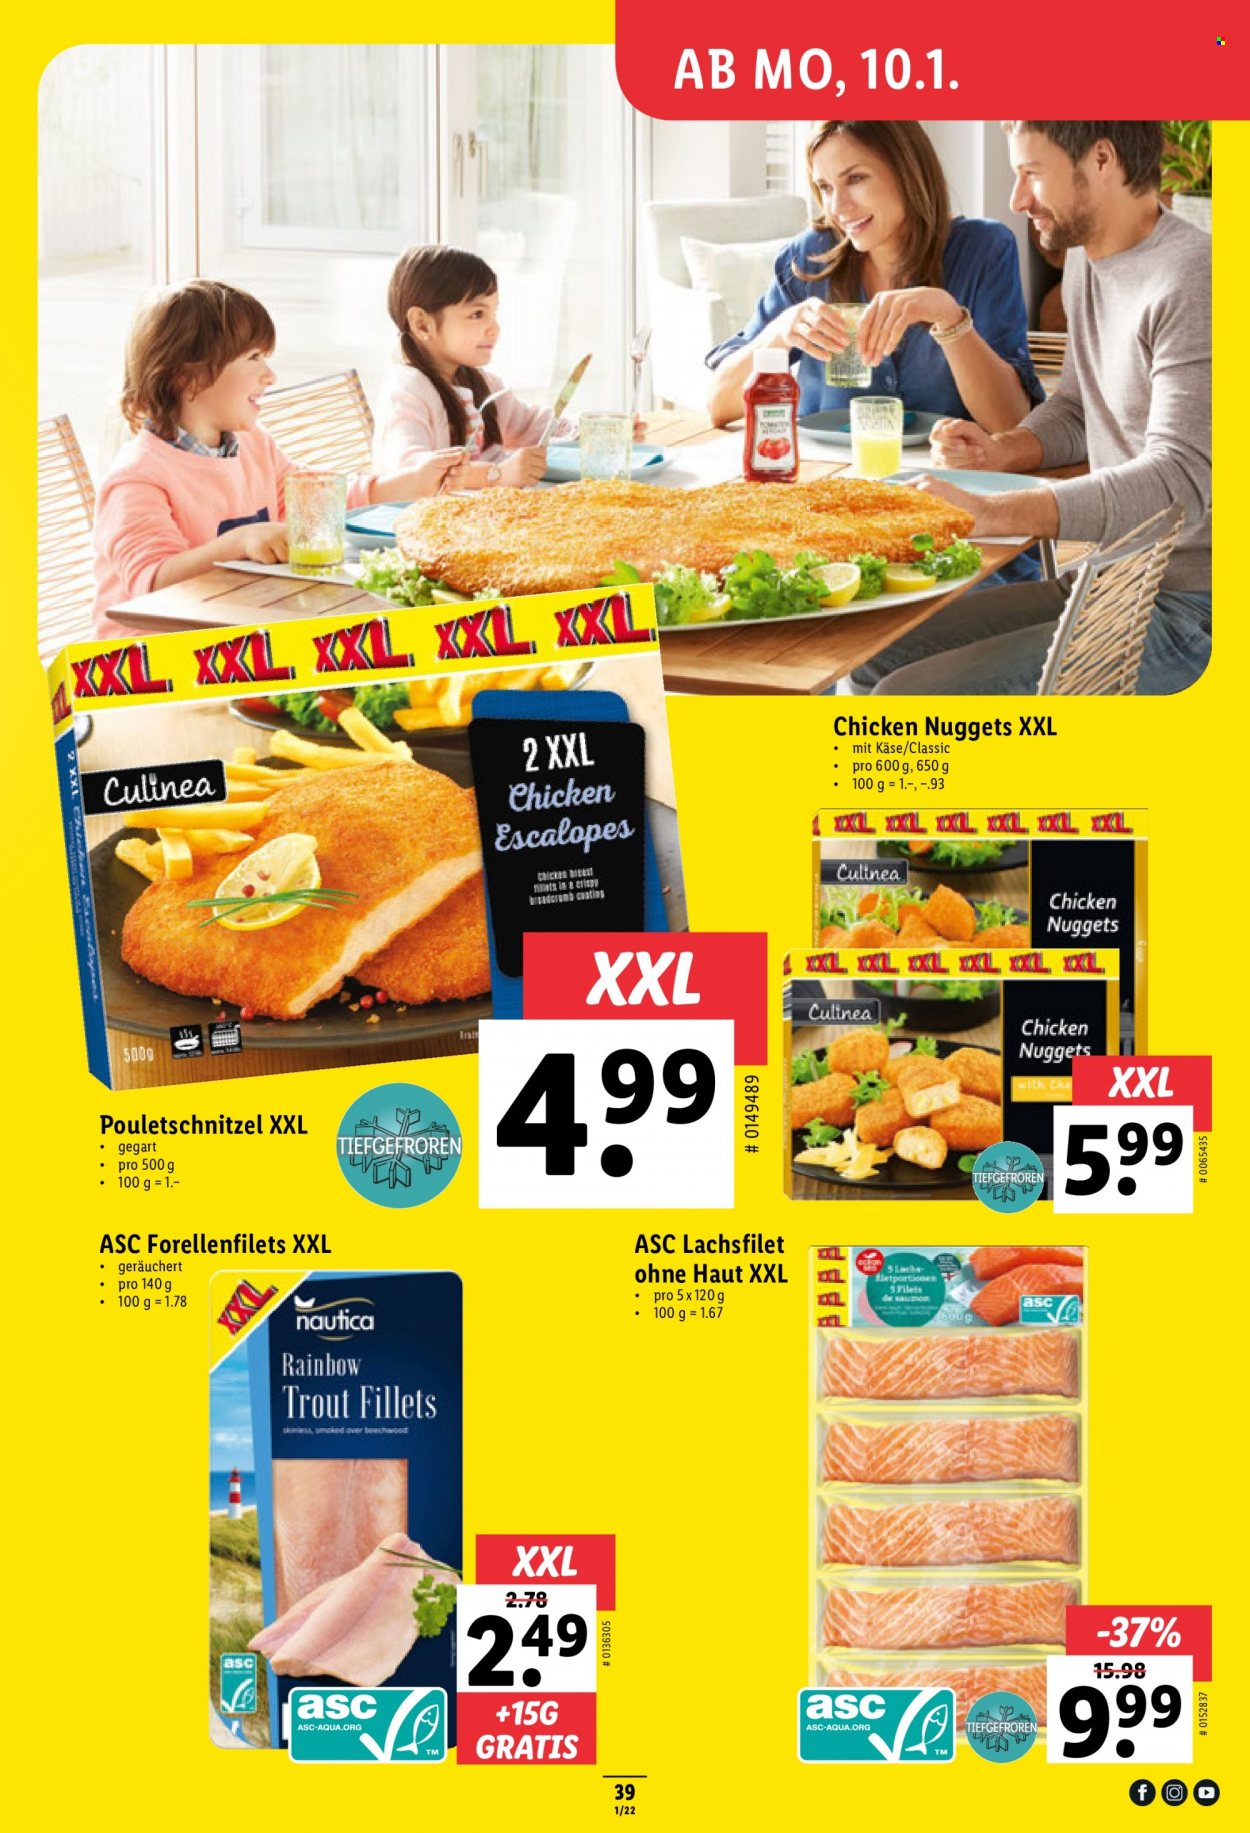 Catalogue Lidl - 6.1.2022 - 12.1.2022. Page 39.